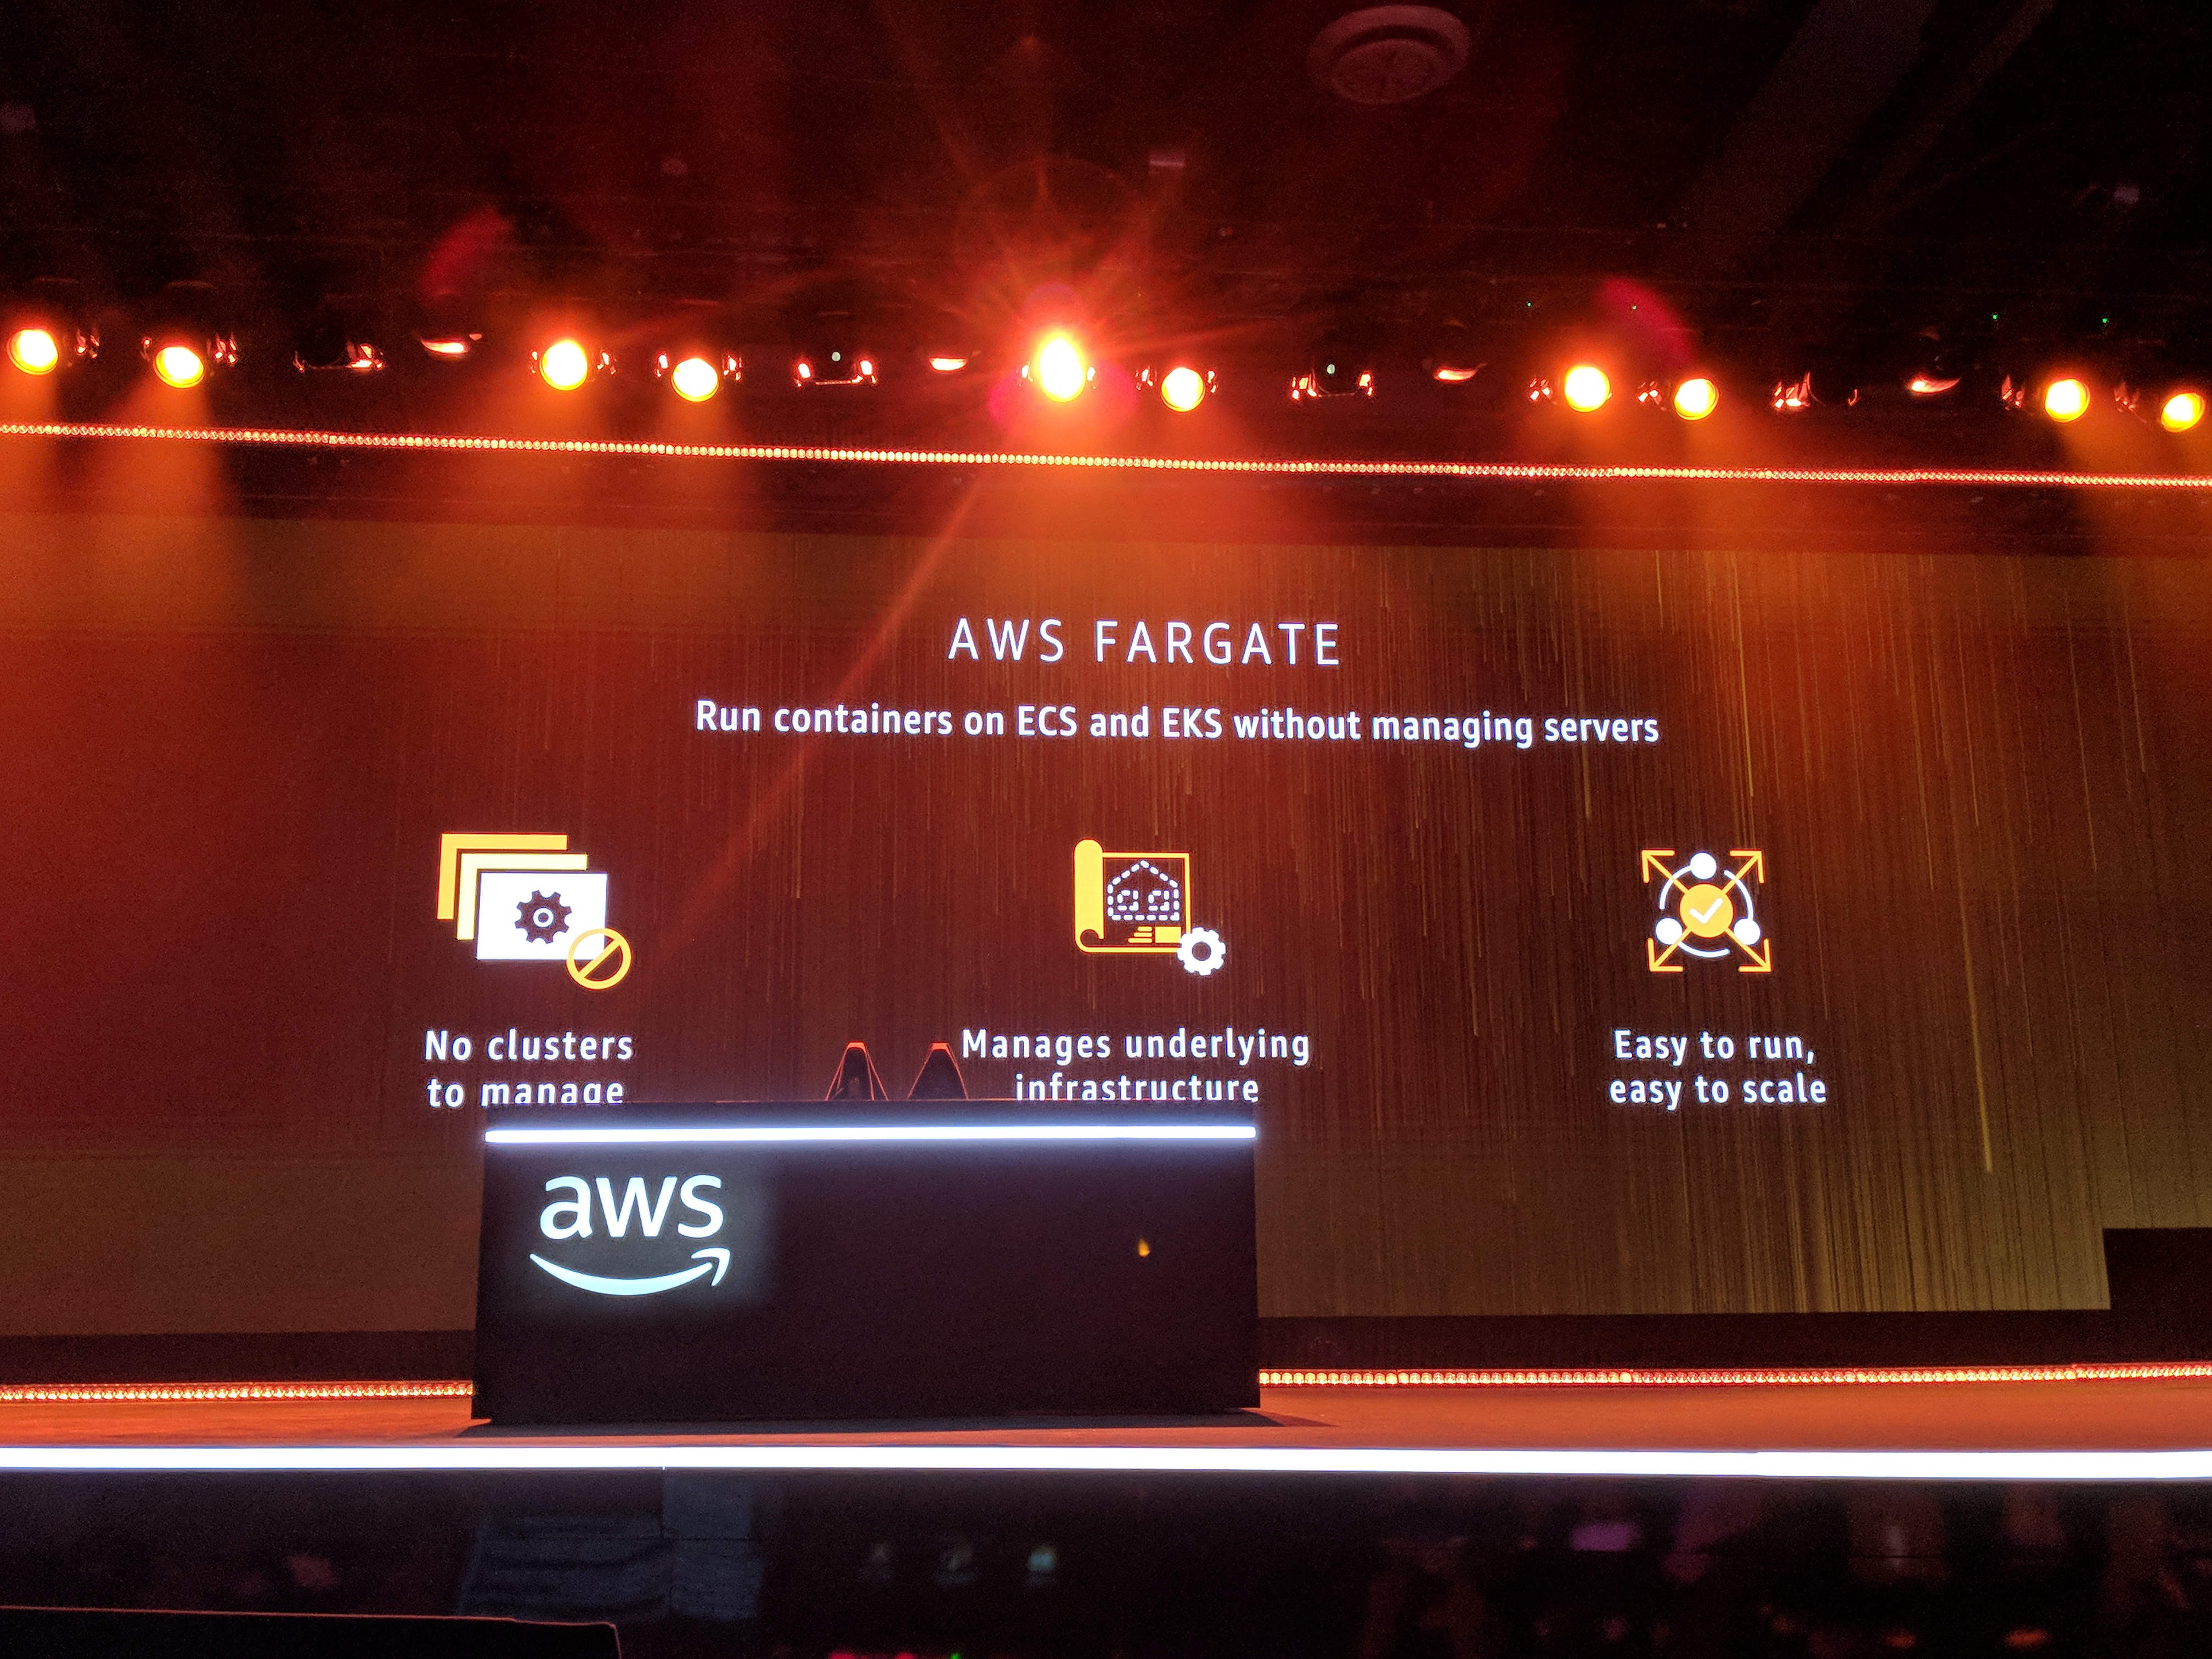 AWS Fargate lets you run containers without managing infrastructure